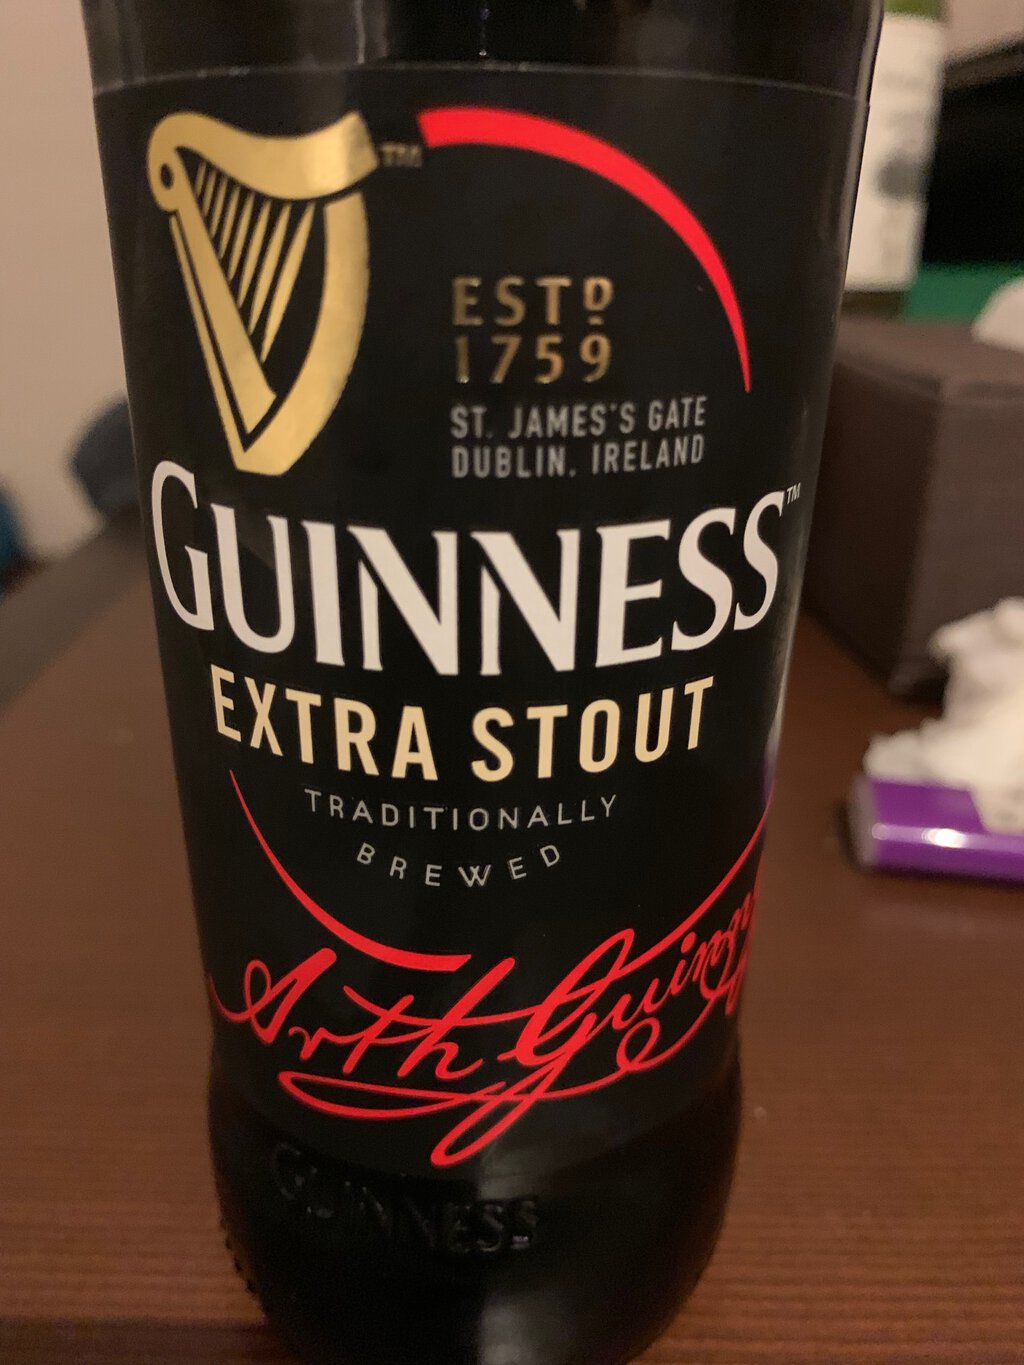 Guiness Extra Stout